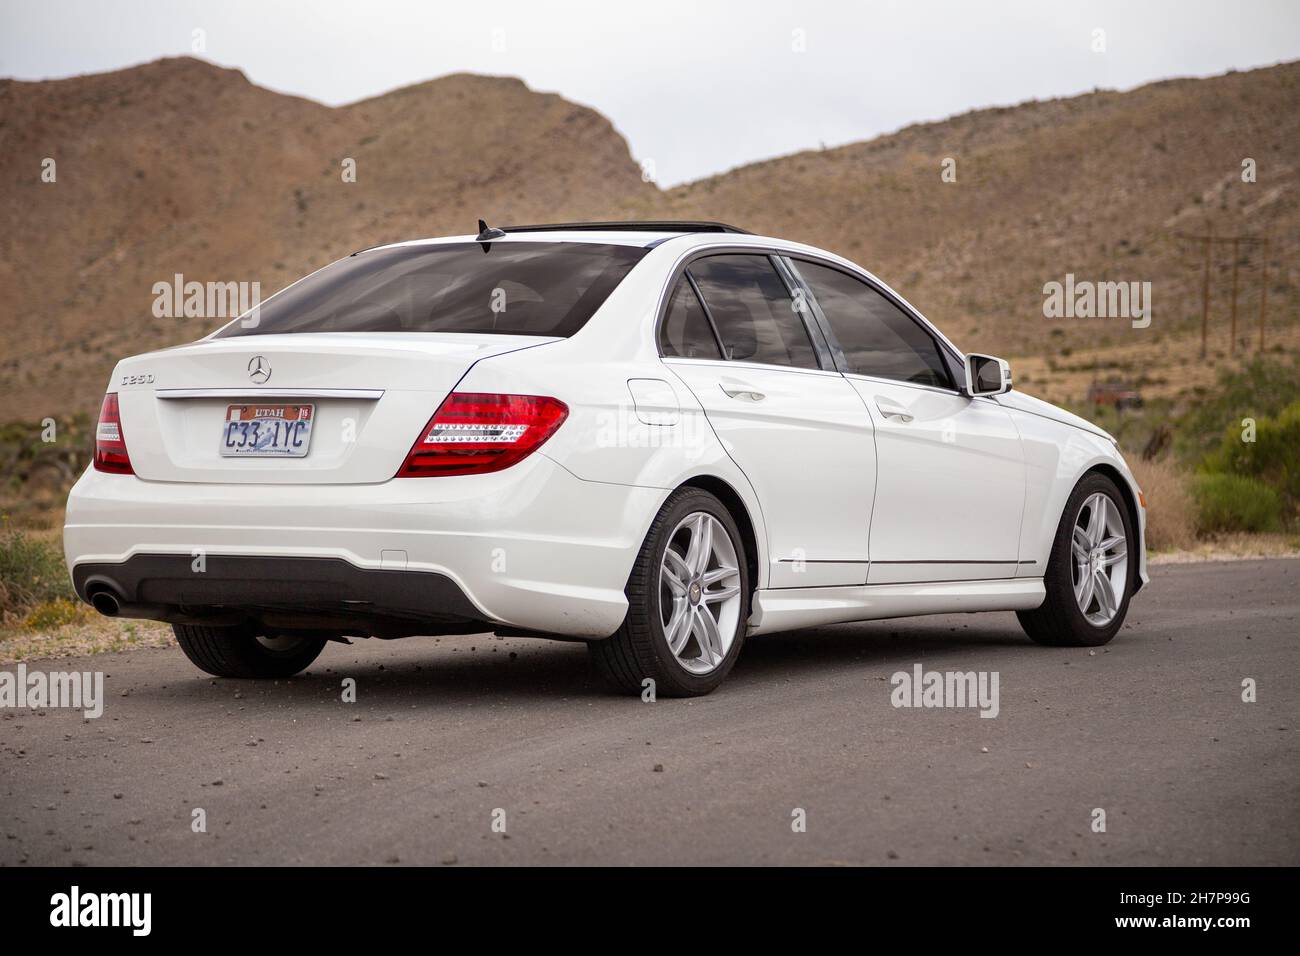 LAS VEGAS, UNITED STATES - May 22, 2015: Rear view of white 2014 Mercedes-Benz C-Class, a small luxury sedan, in the desert landscape of Nevada, USA. Stock Photo